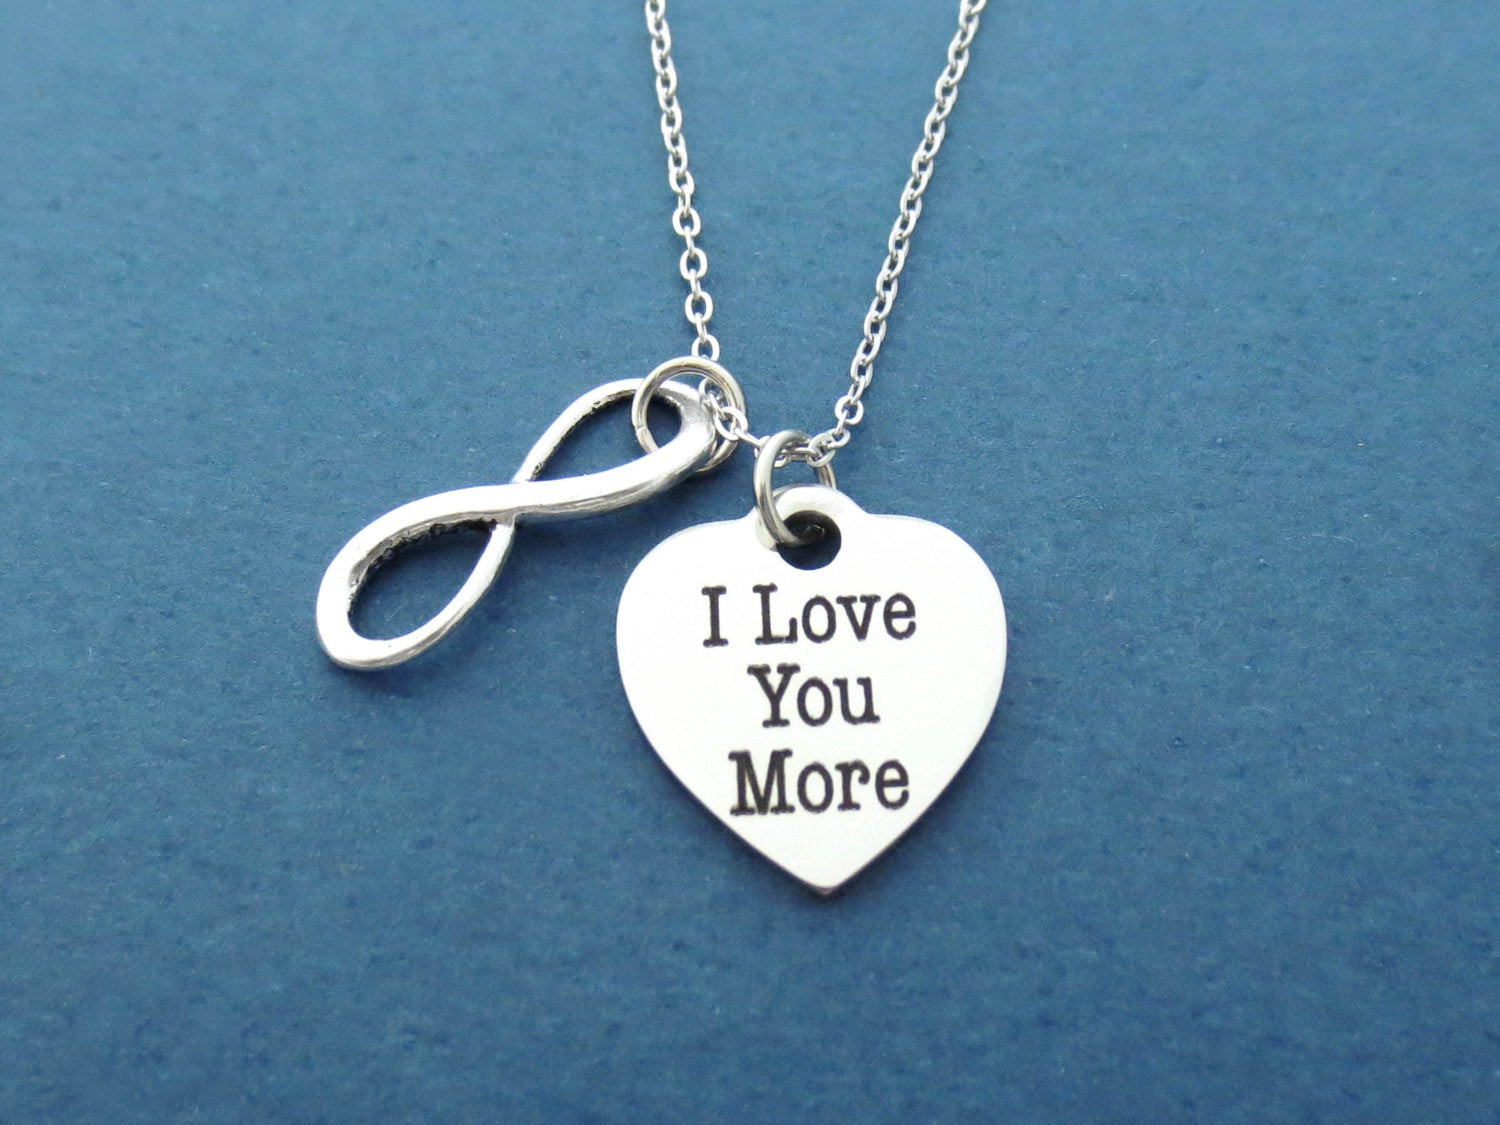 I Love You More Necklace
 Infinity I Love You More Heart Silver Necklace Love